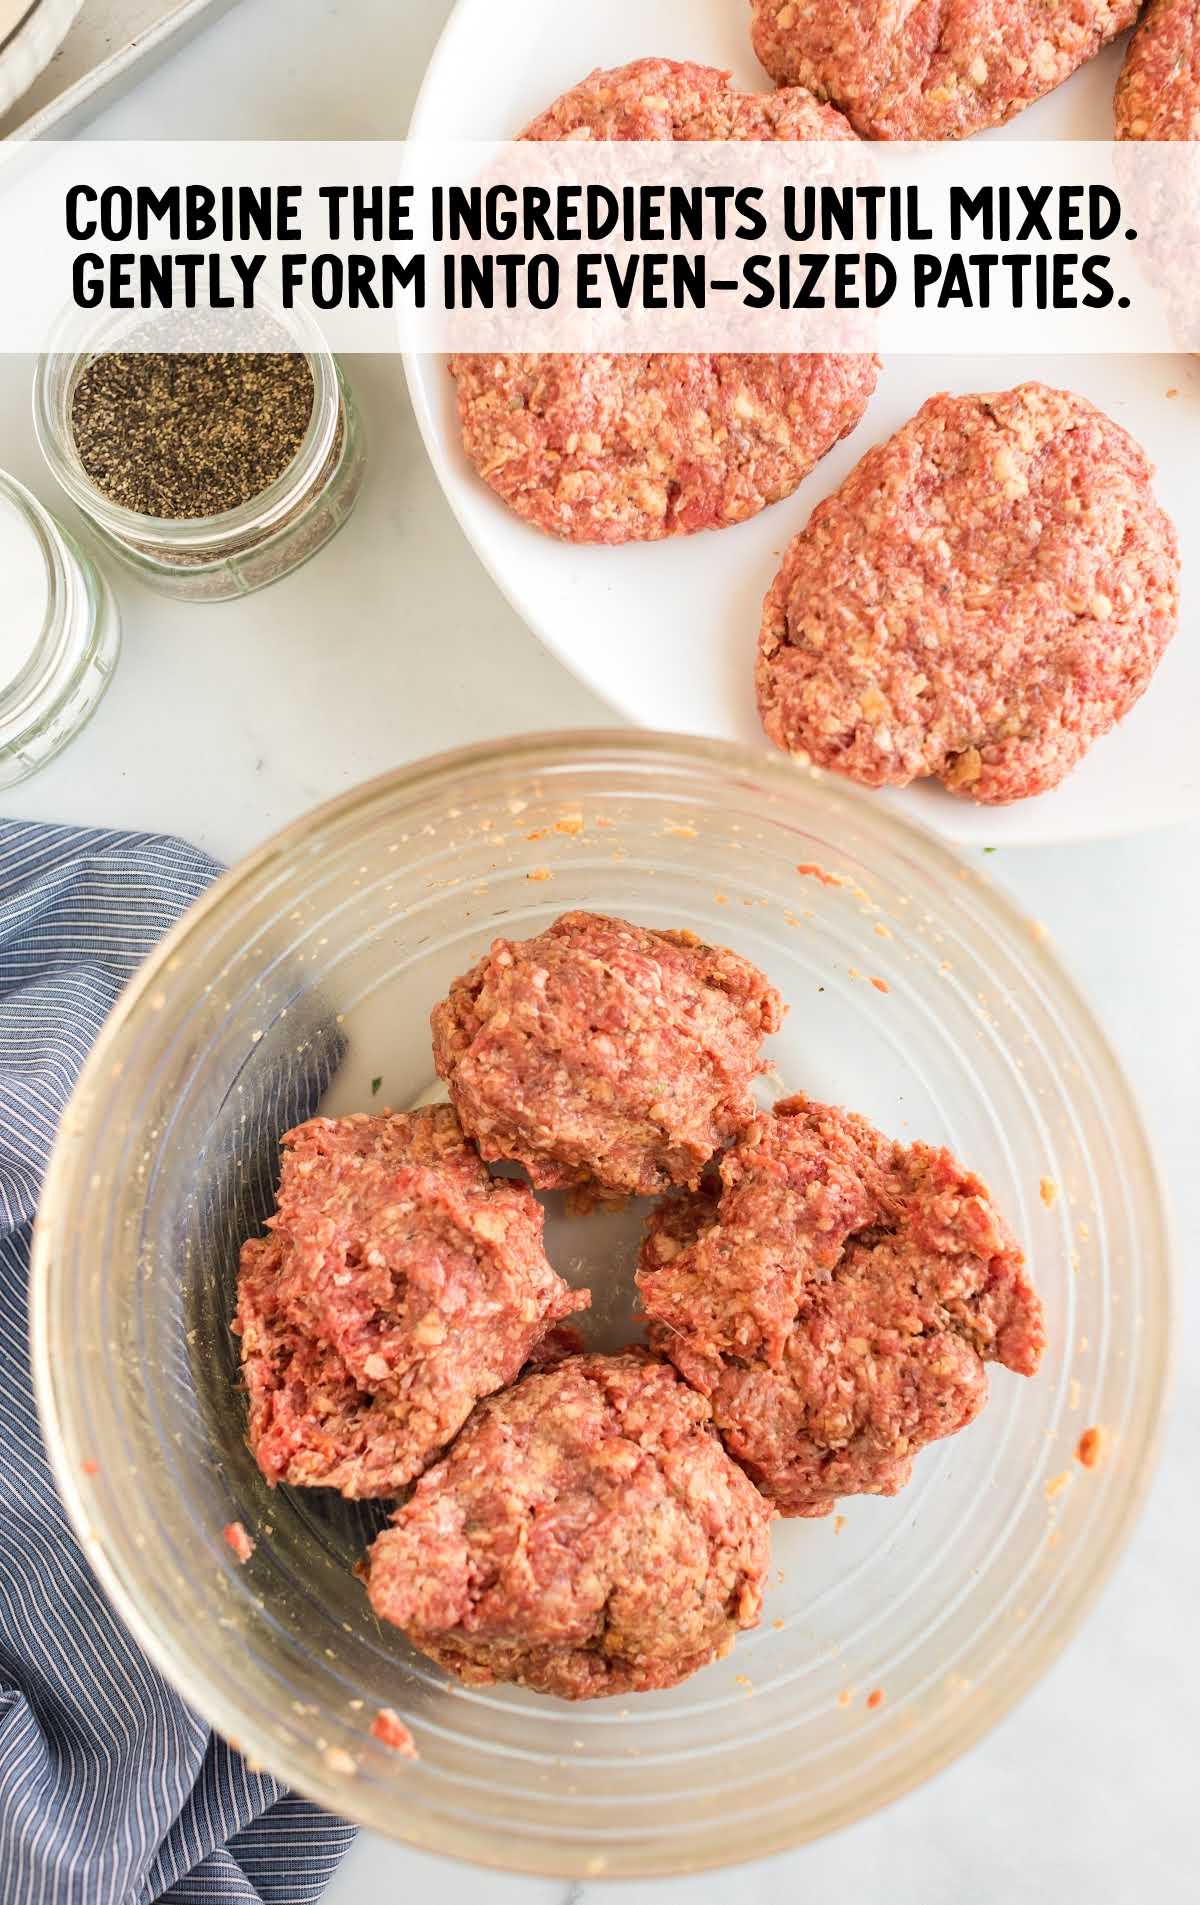 Poor Man's Steak process shot of ground beef shaped into a pattie